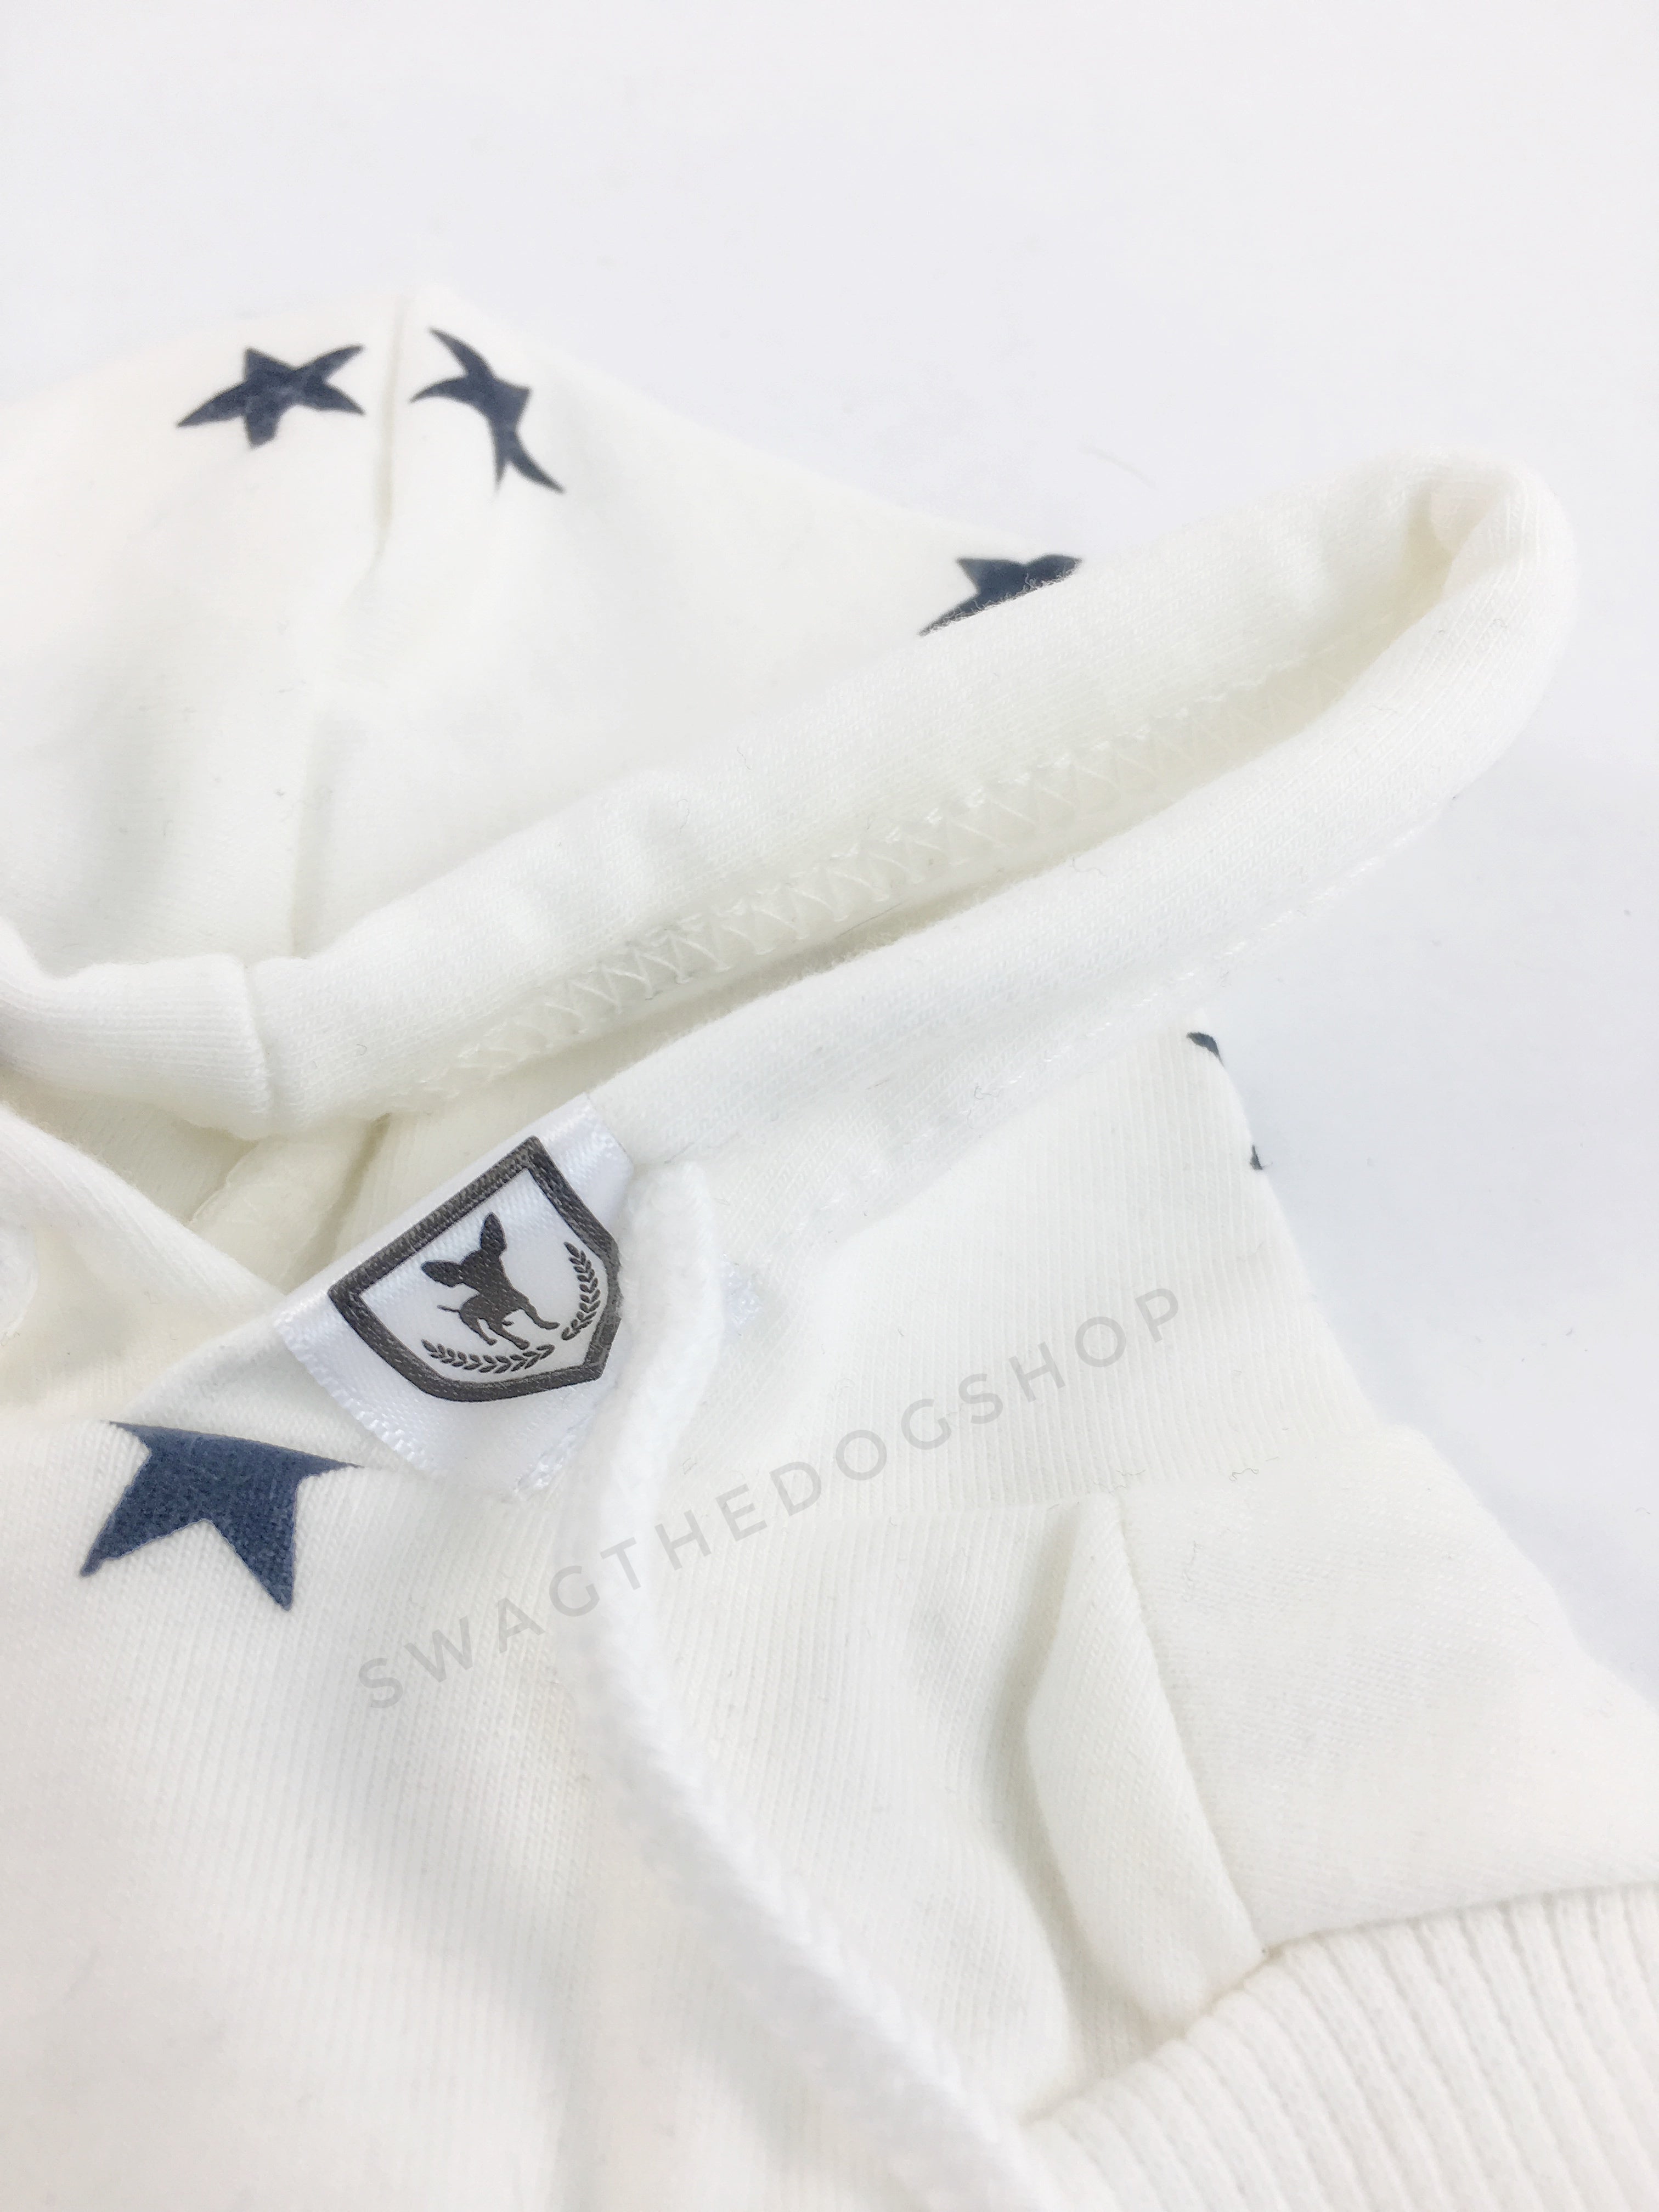 All-Star White Hoodie - Close Up of Label and Hood. White and Blue Star Hoodie